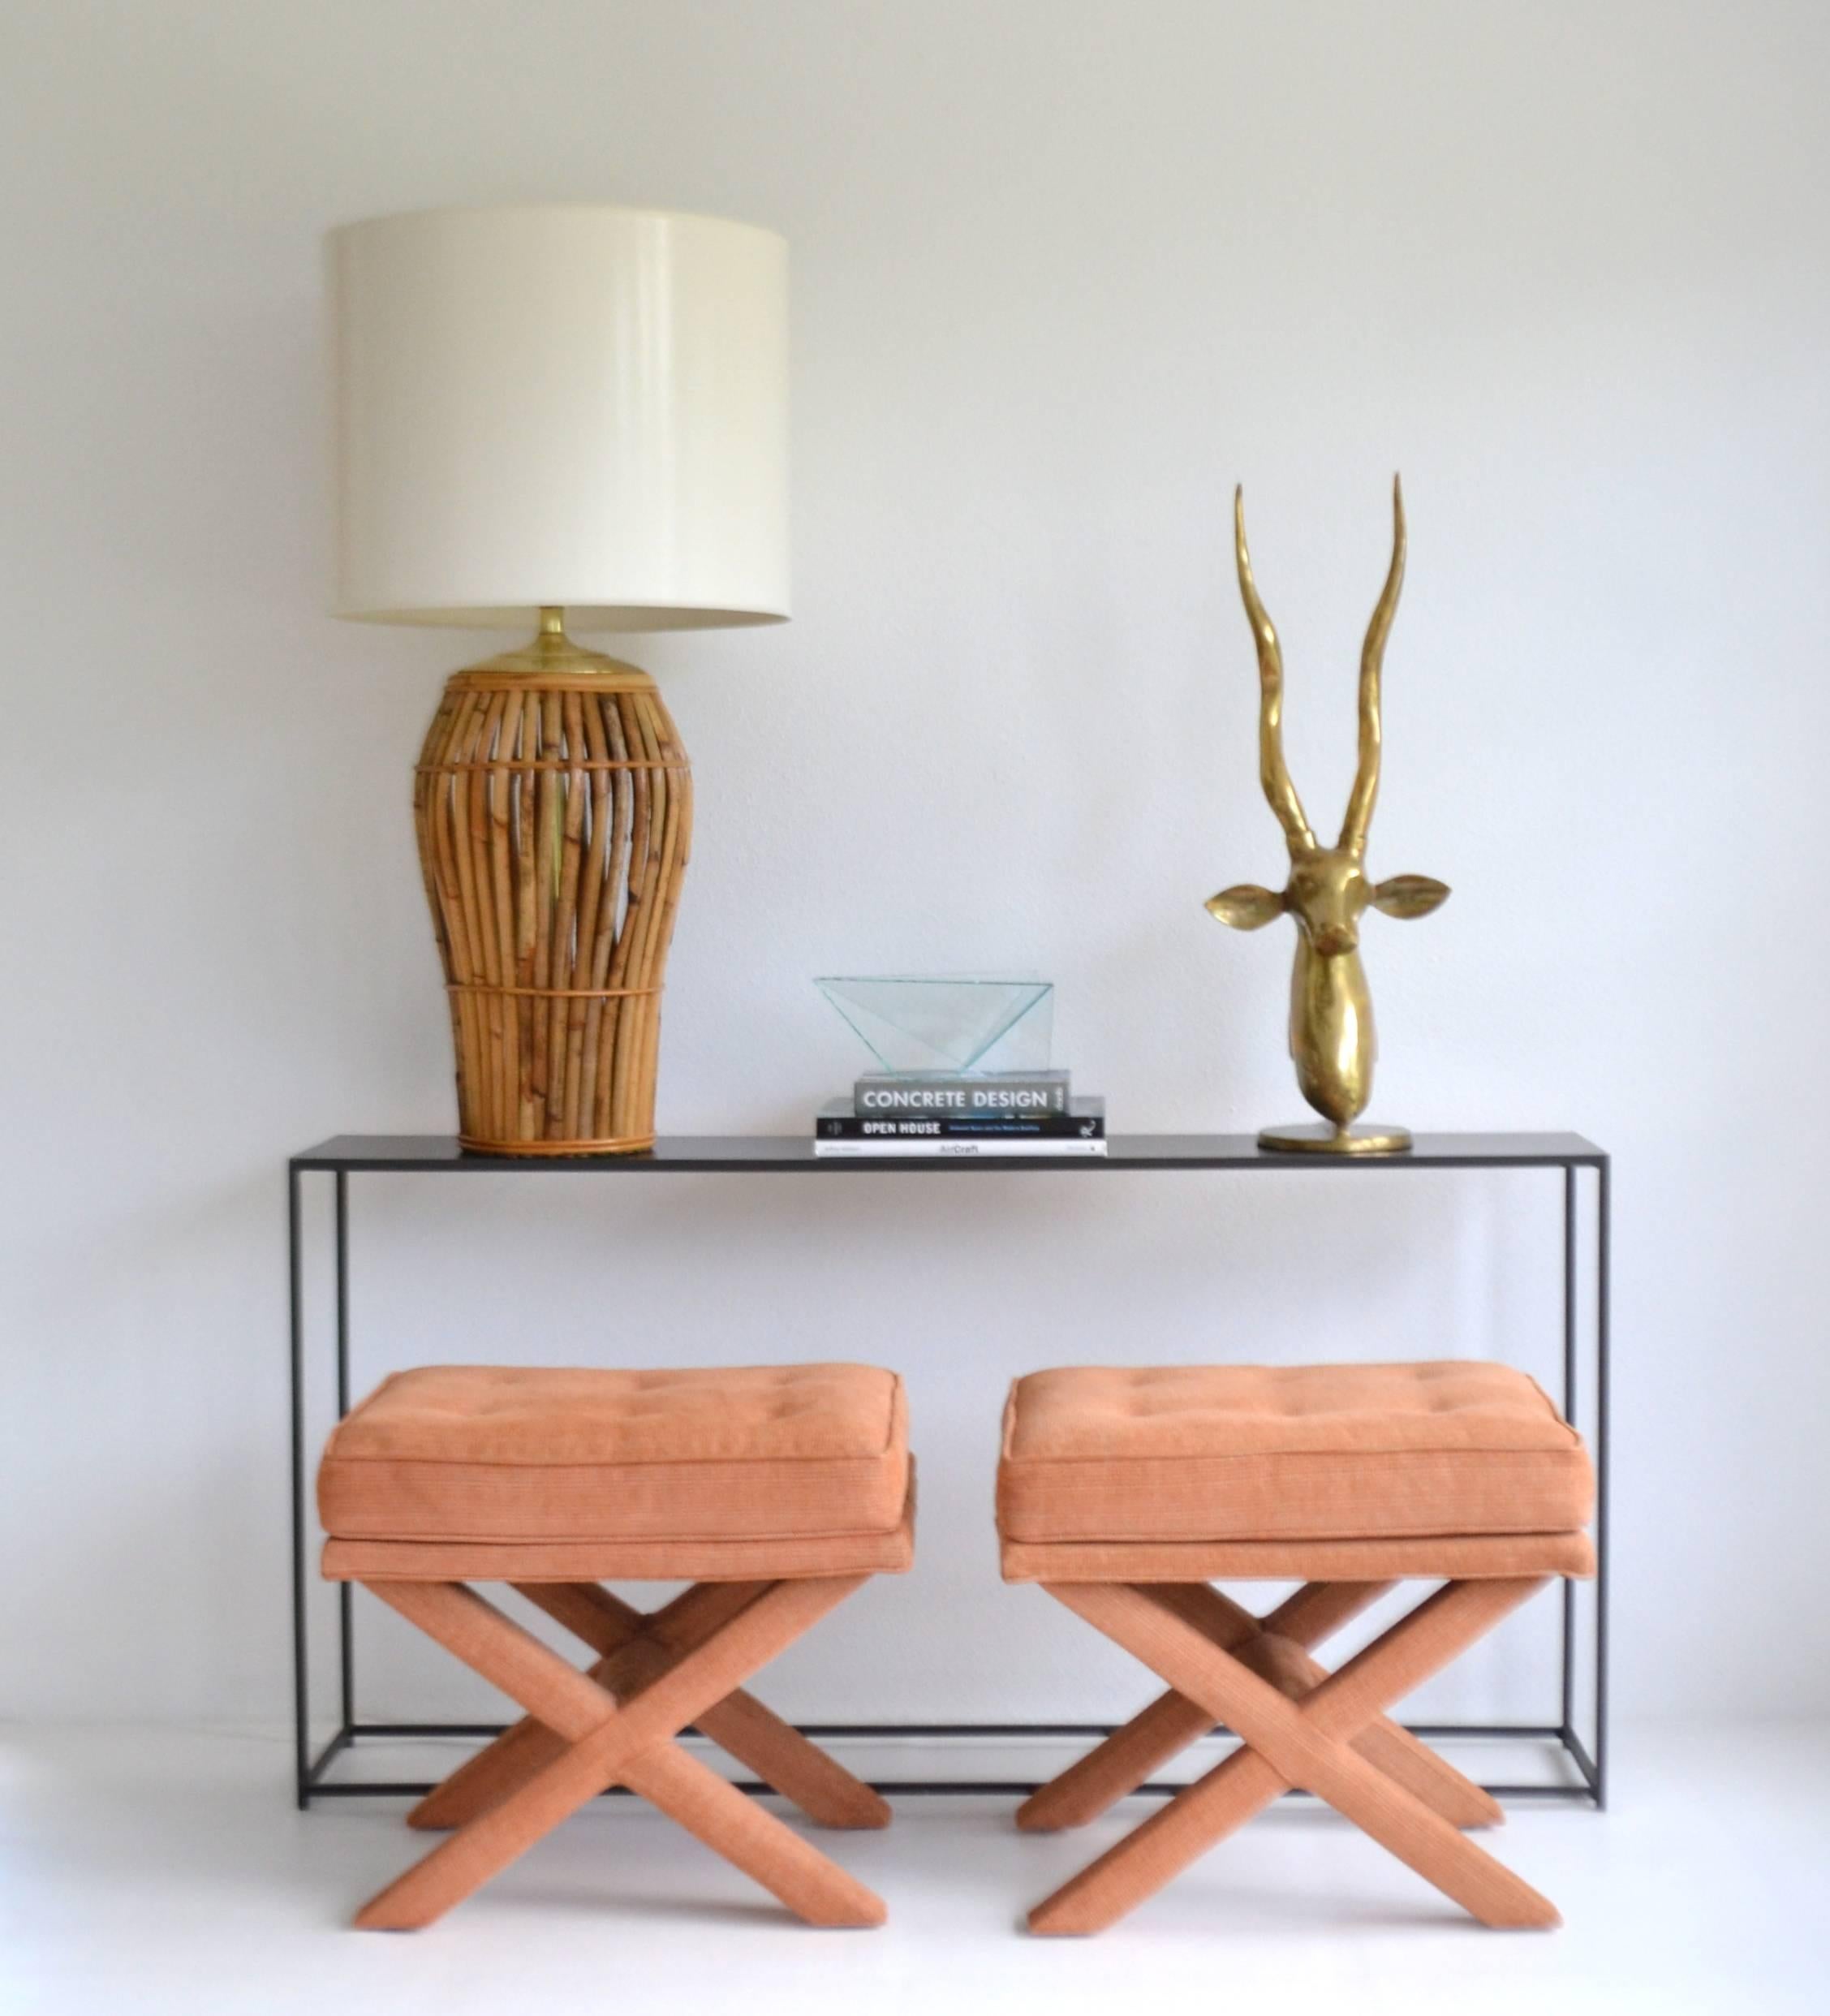 Striking midcentury split bamboo jar form table lamp, circa 1960s-1970s. Shade not included. Wired with brass fittings. The overall all measurements are 39